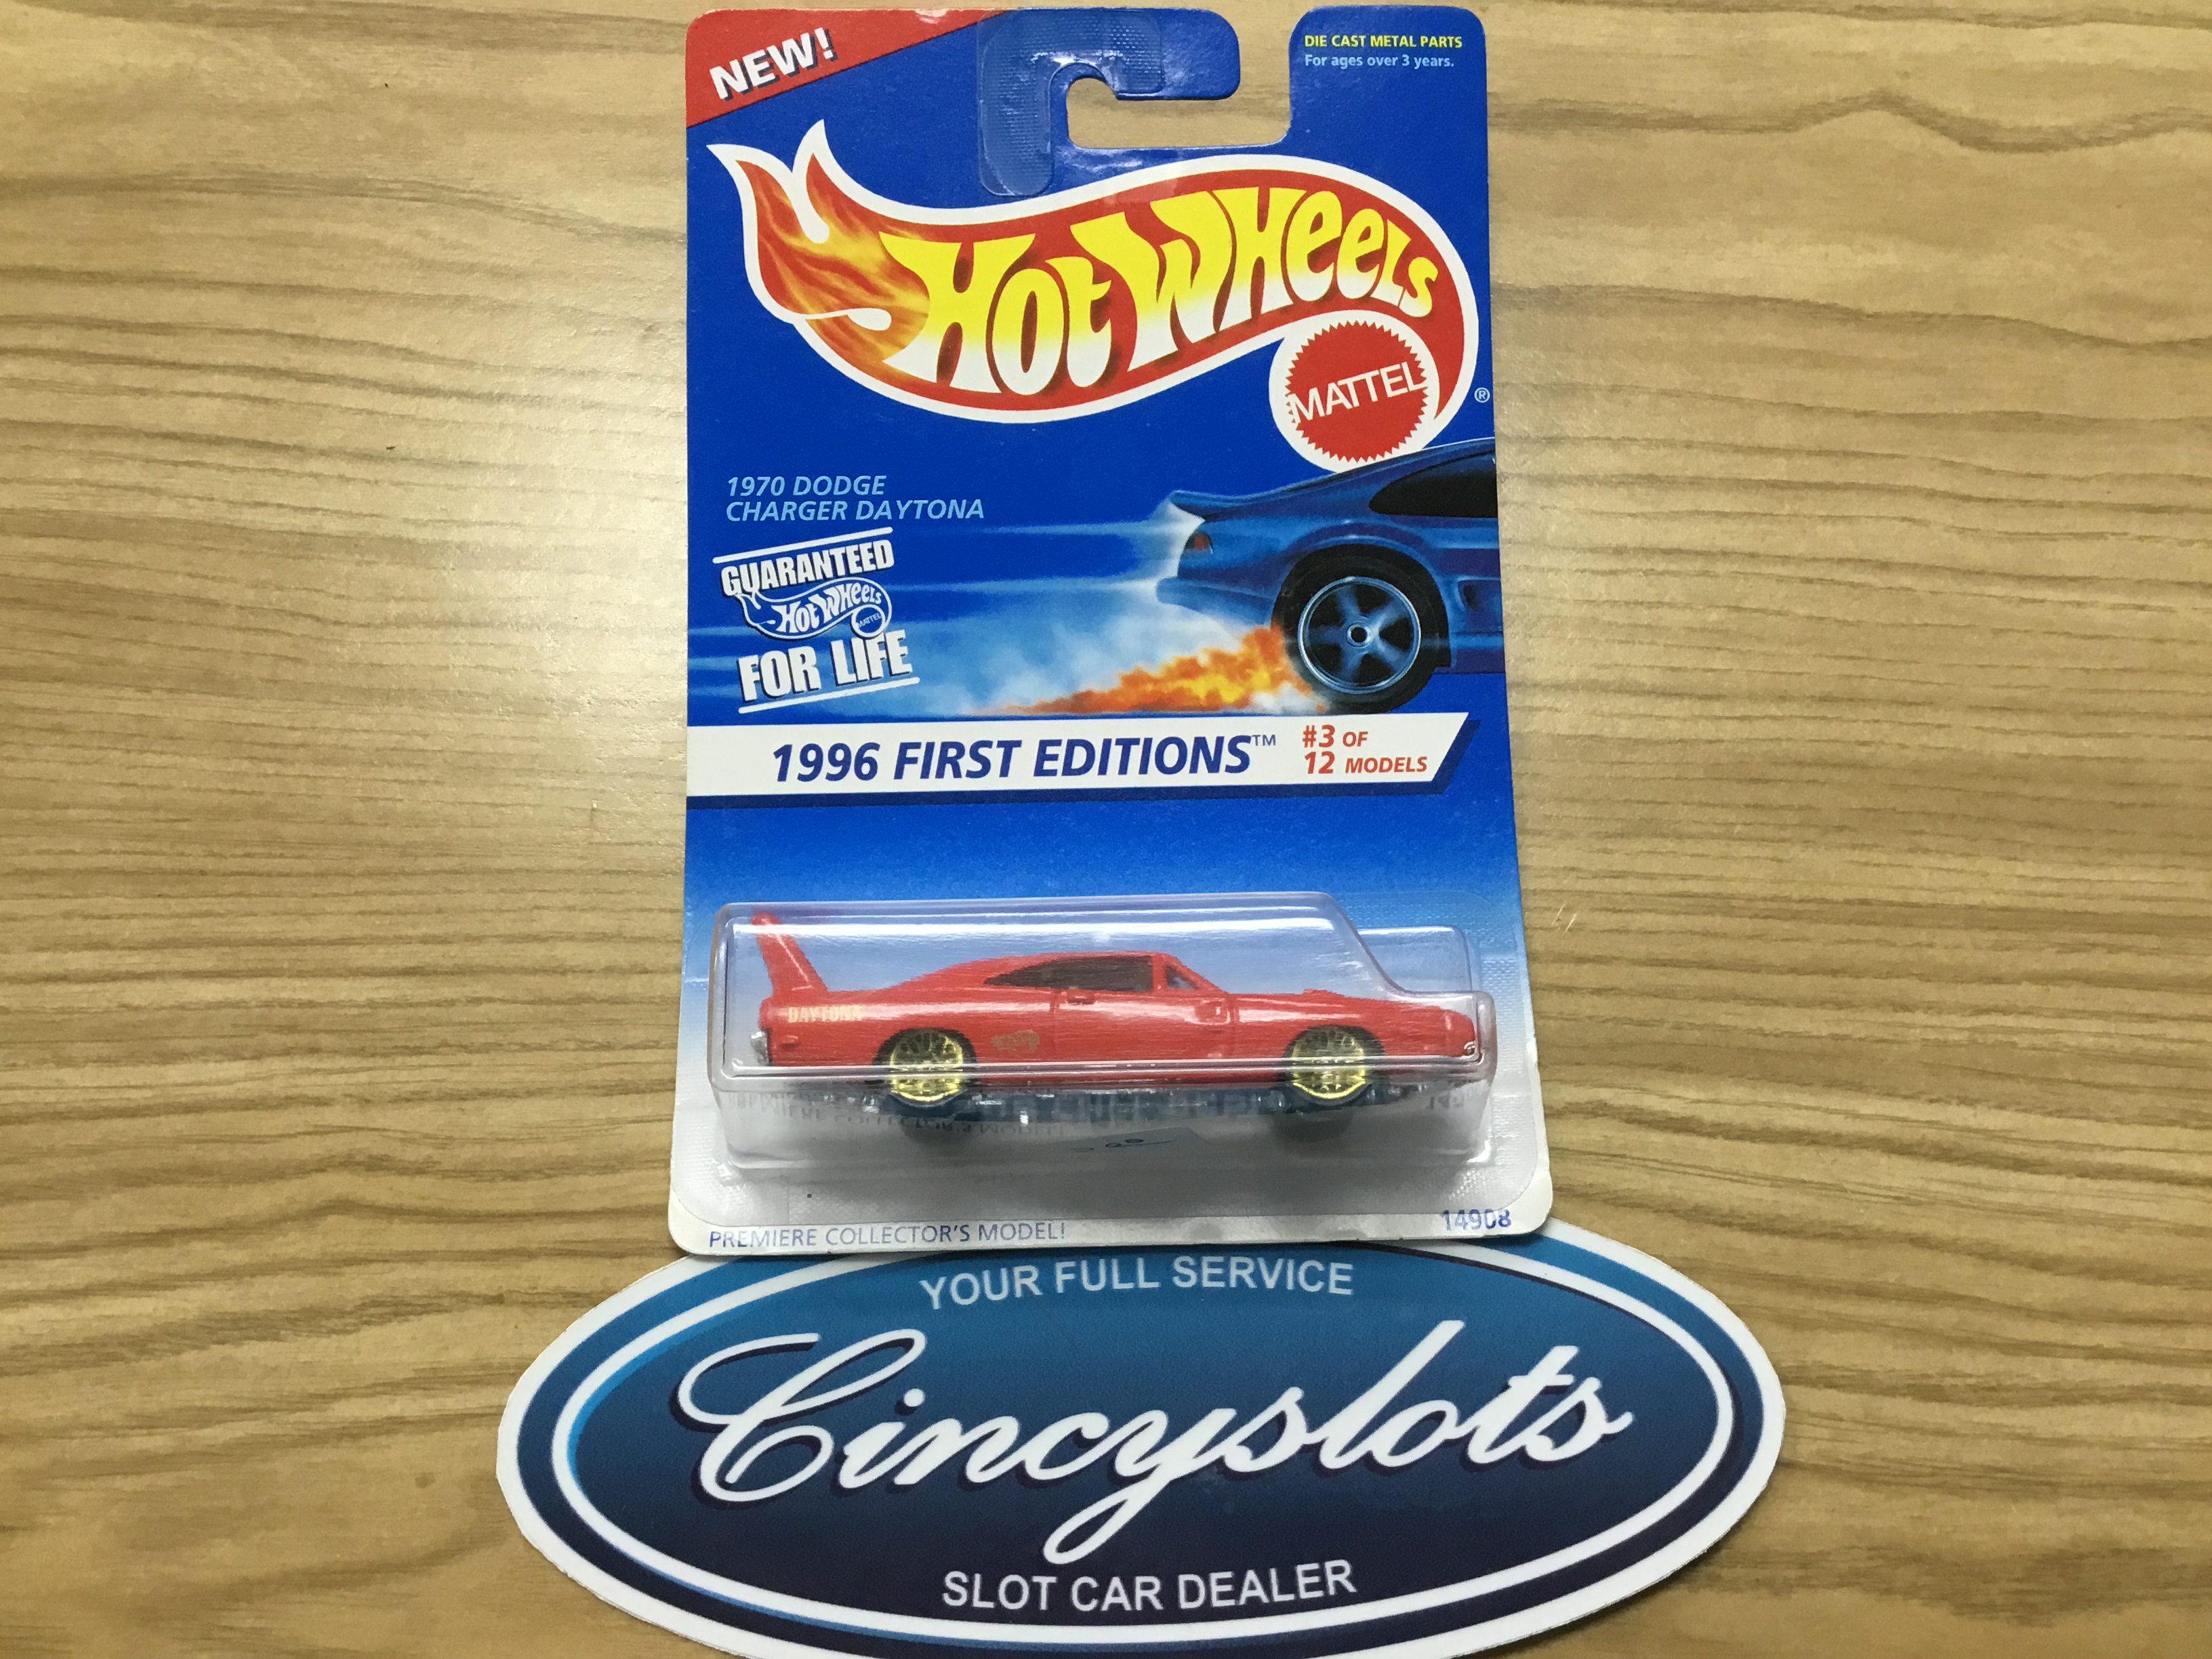 3 diecast 1/64 scale car 1996 First Editions Hot Wheels No 1970 DODGE CHARGER DAYTONA Gold Rims 7-spke variant 